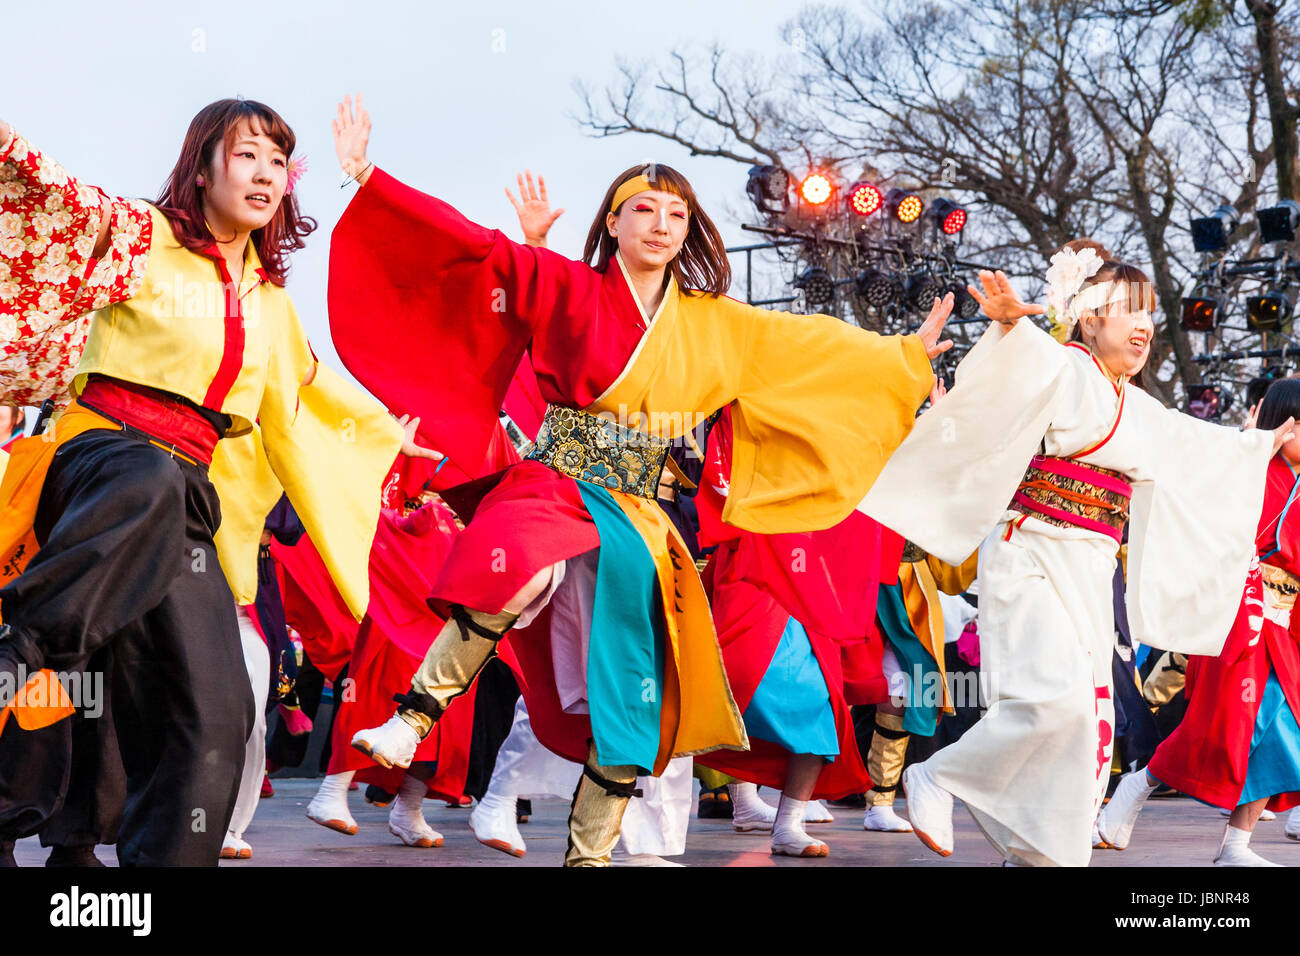 Hinokuni Yosakoi Dance Festival at Kumamoto, Japan. Members of various dance teams dancing together on stage for the grand finale of the two day event. Stock Photo